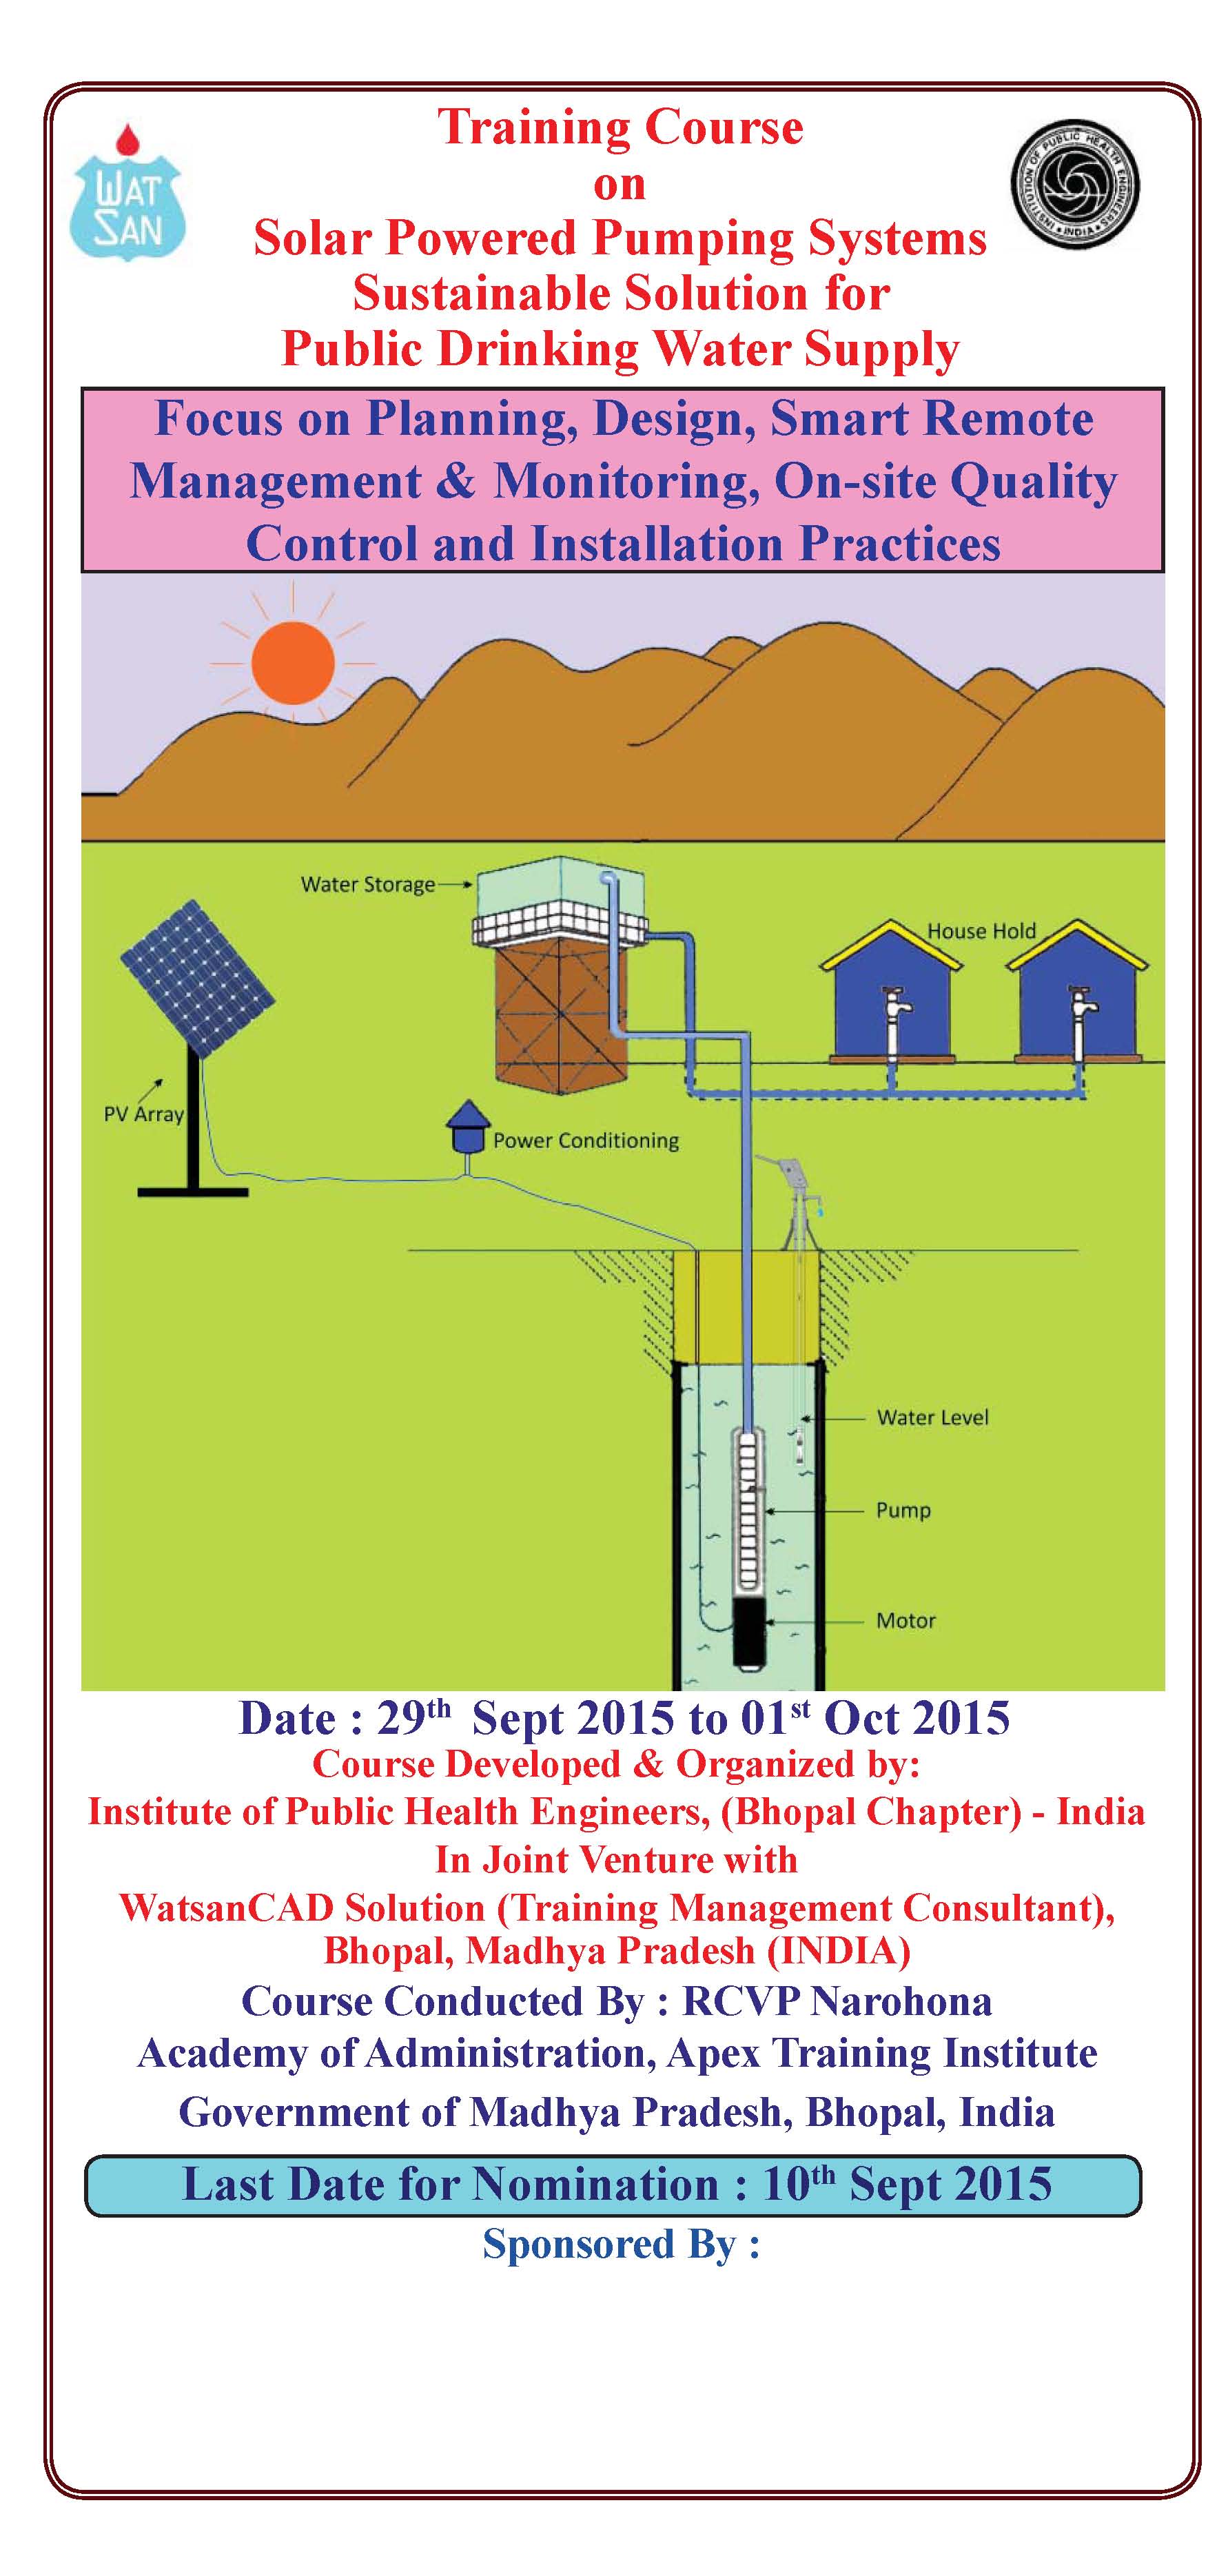 Solar Powered Pumping System a sustainable solution for drinking water supply - Focus on Planning, Designing, Quality Control and Installation T...